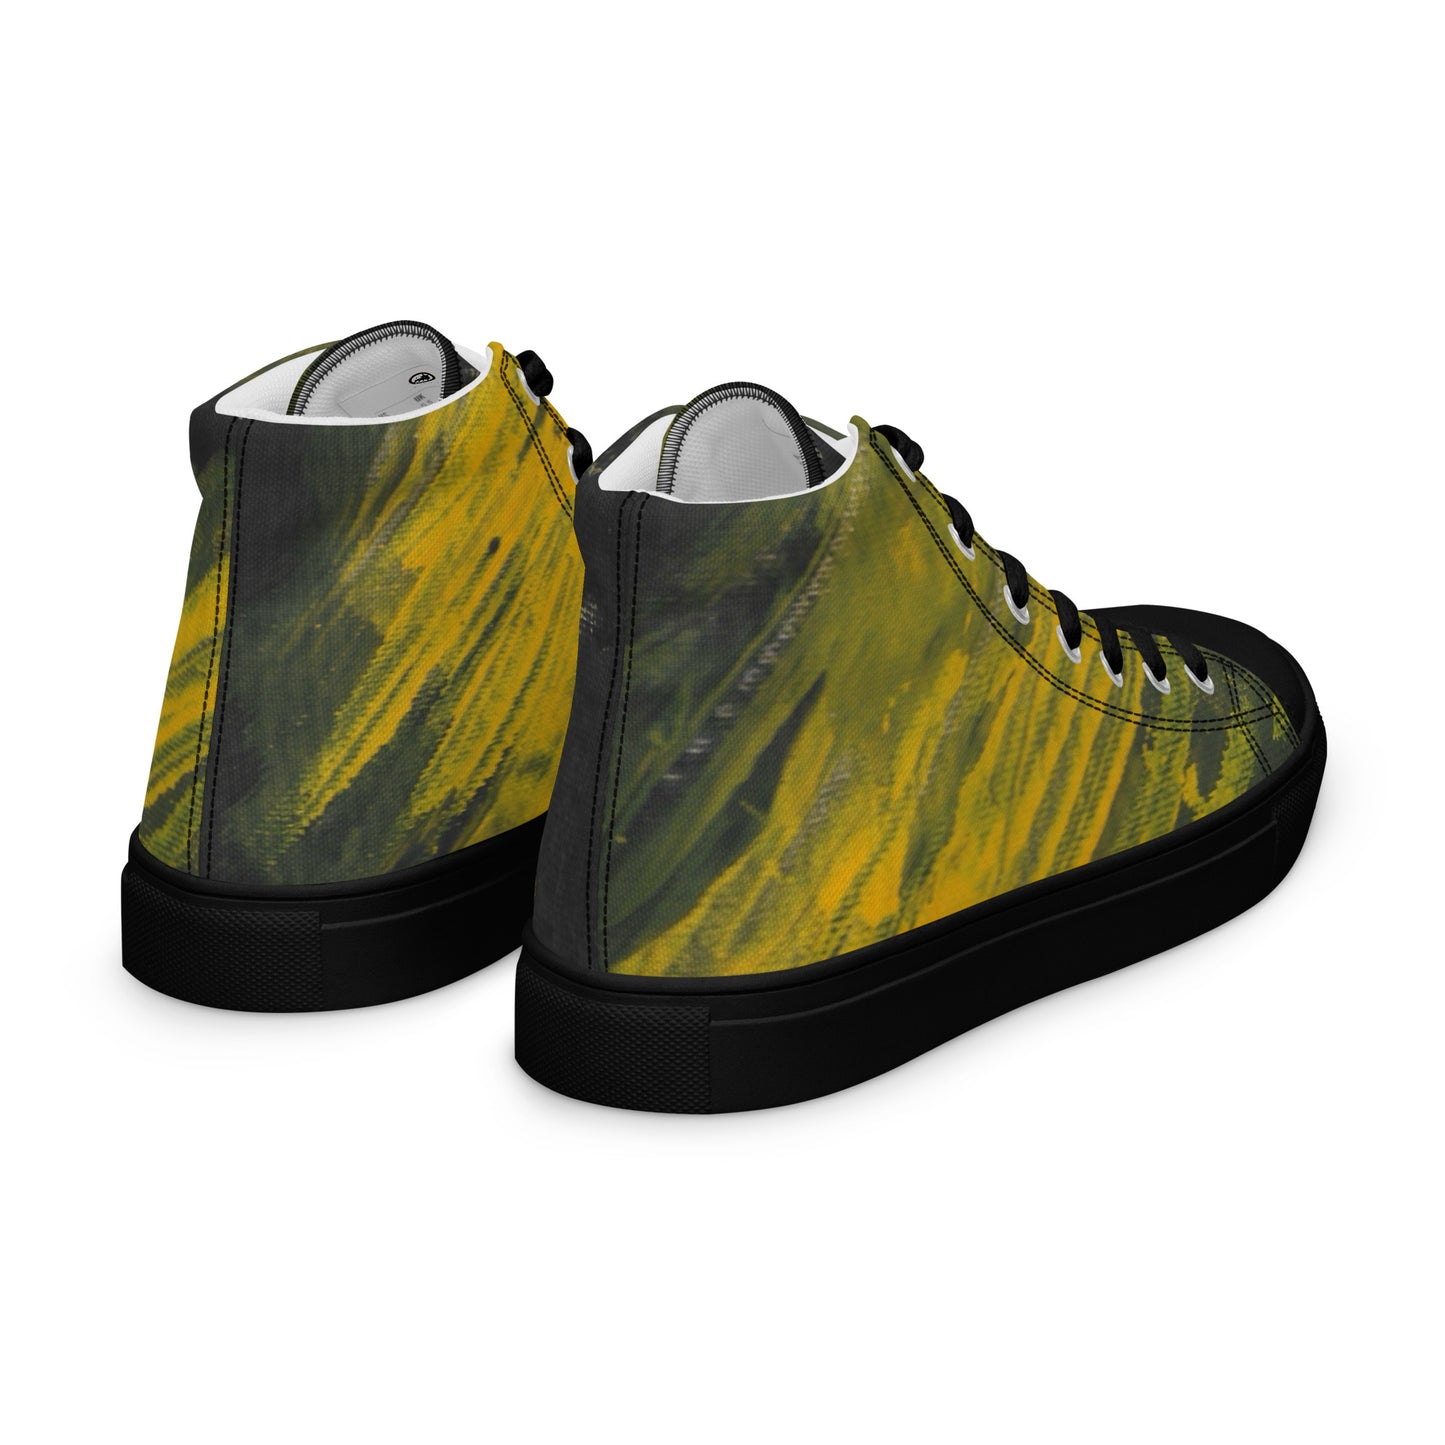 Speed Men’s high top canvas shoes